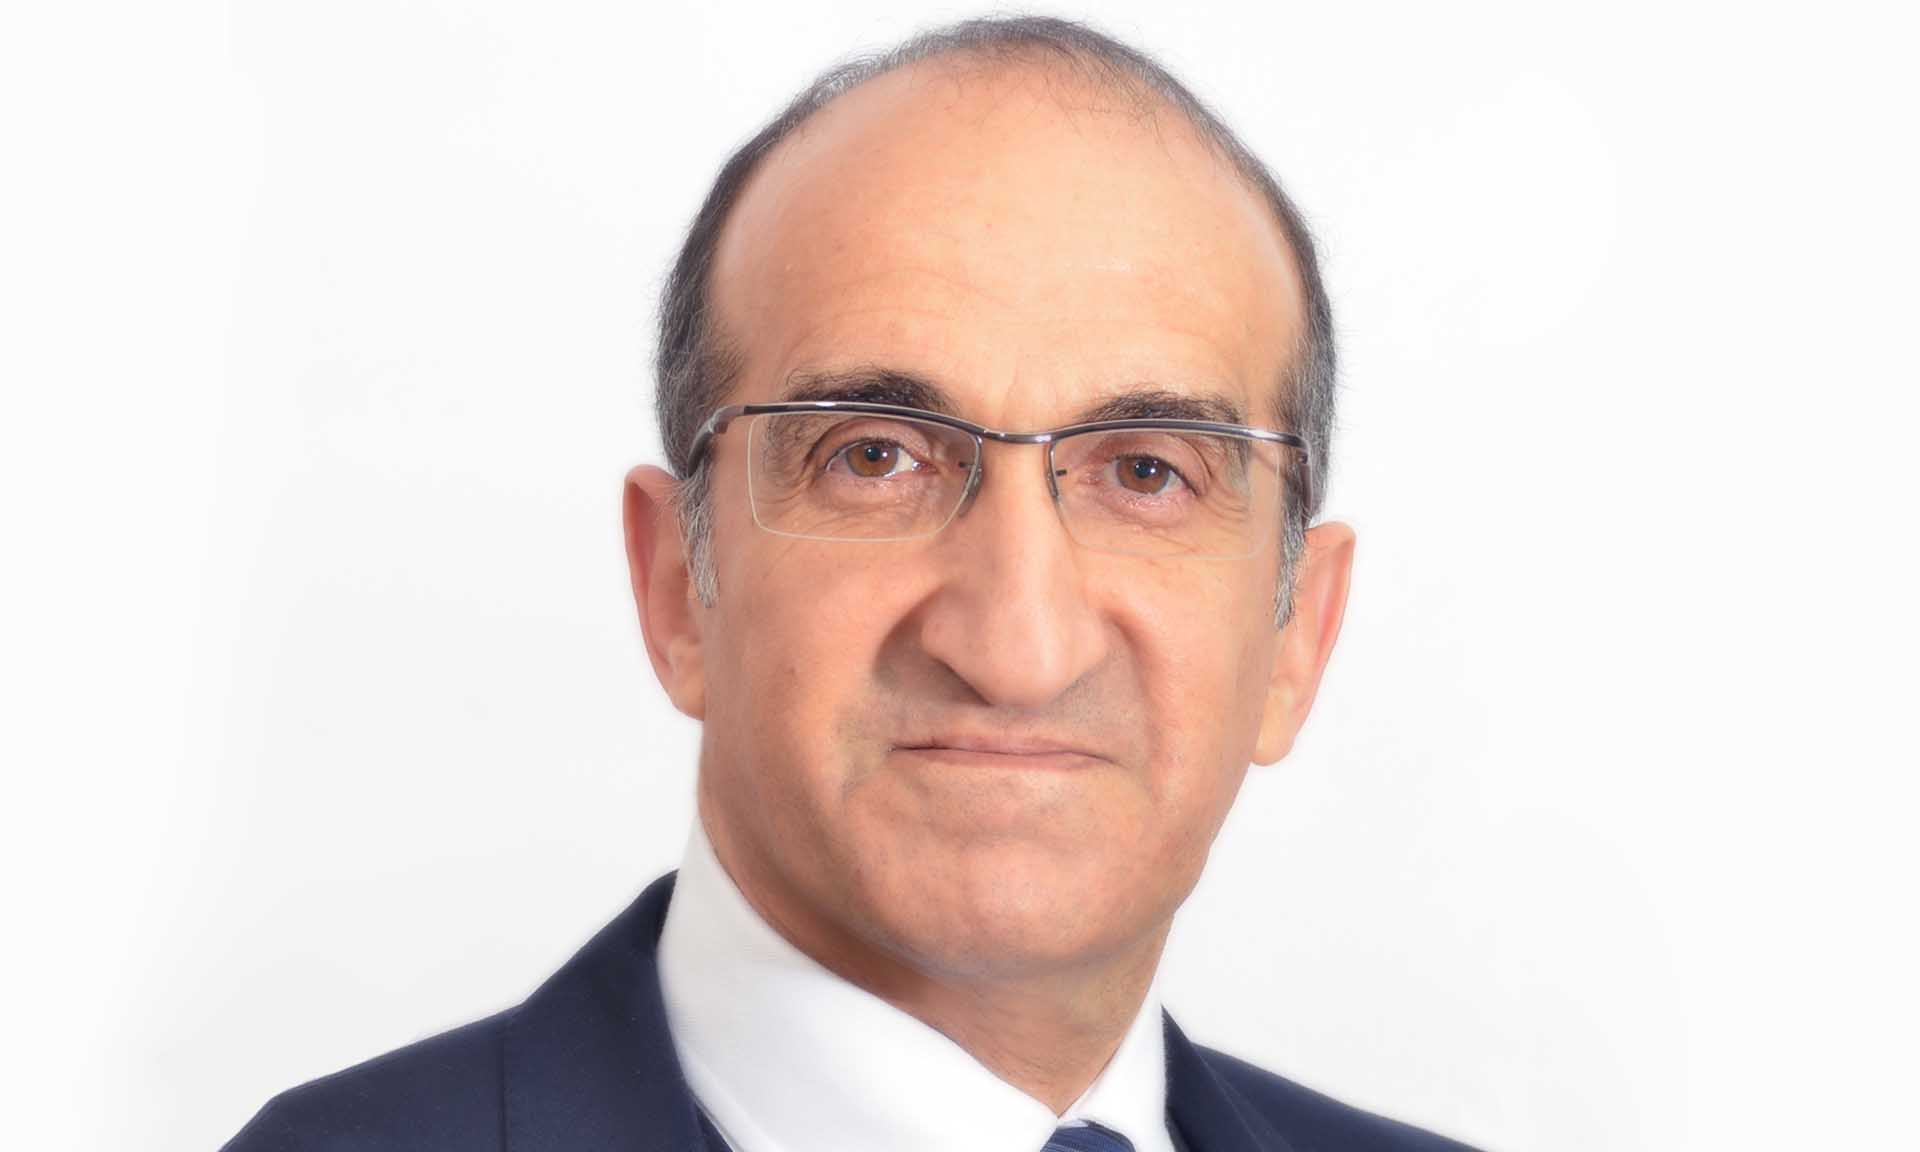 Group Chief Executive Officer, Mr. Sael Al Waary